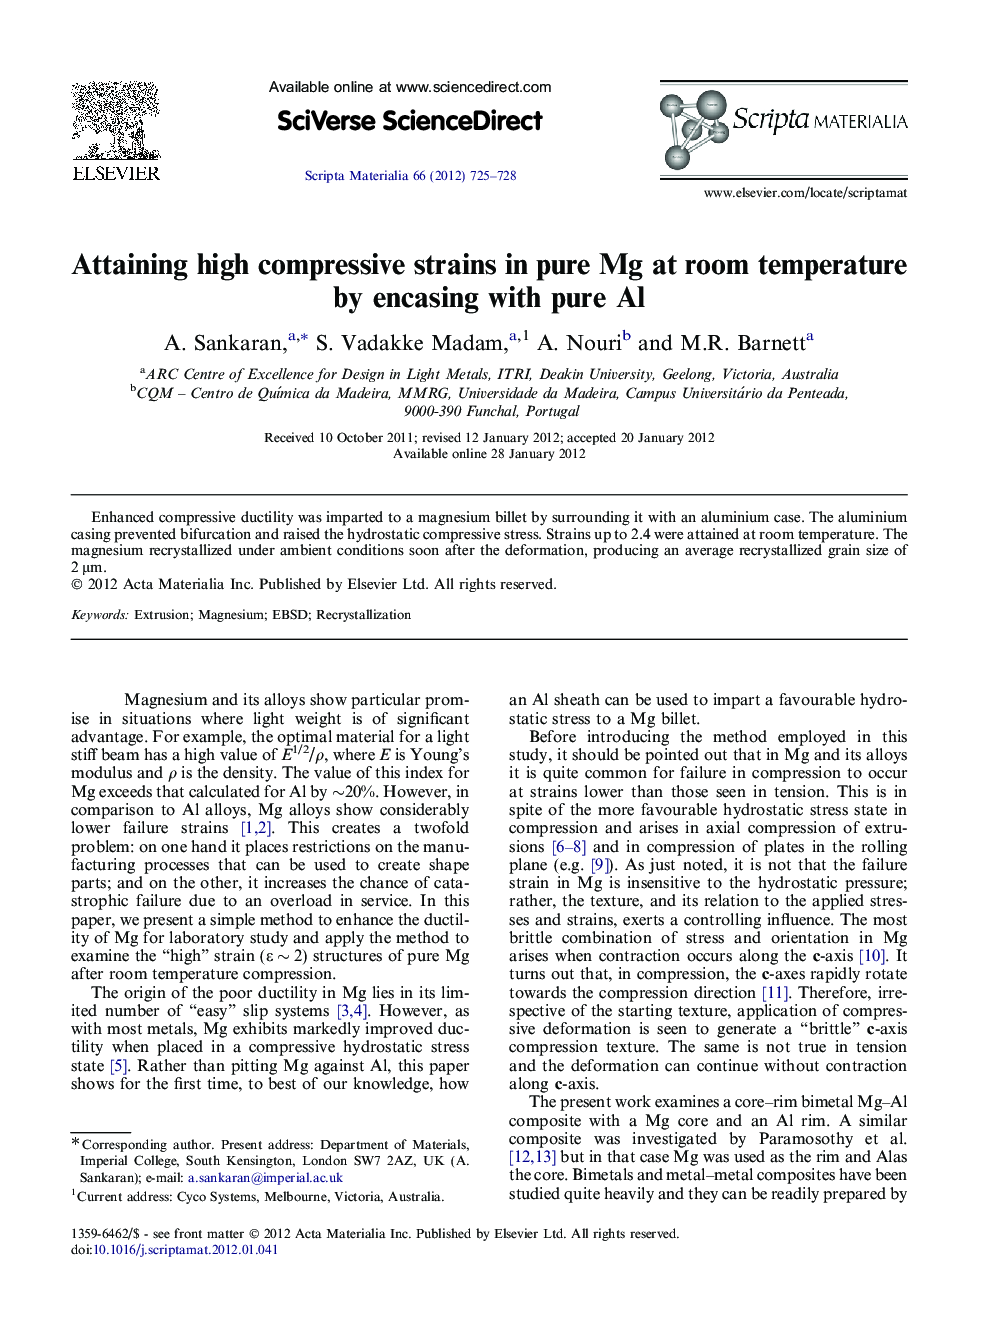 Attaining high compressive strains in pure Mg at room temperature by encasing with pure Al